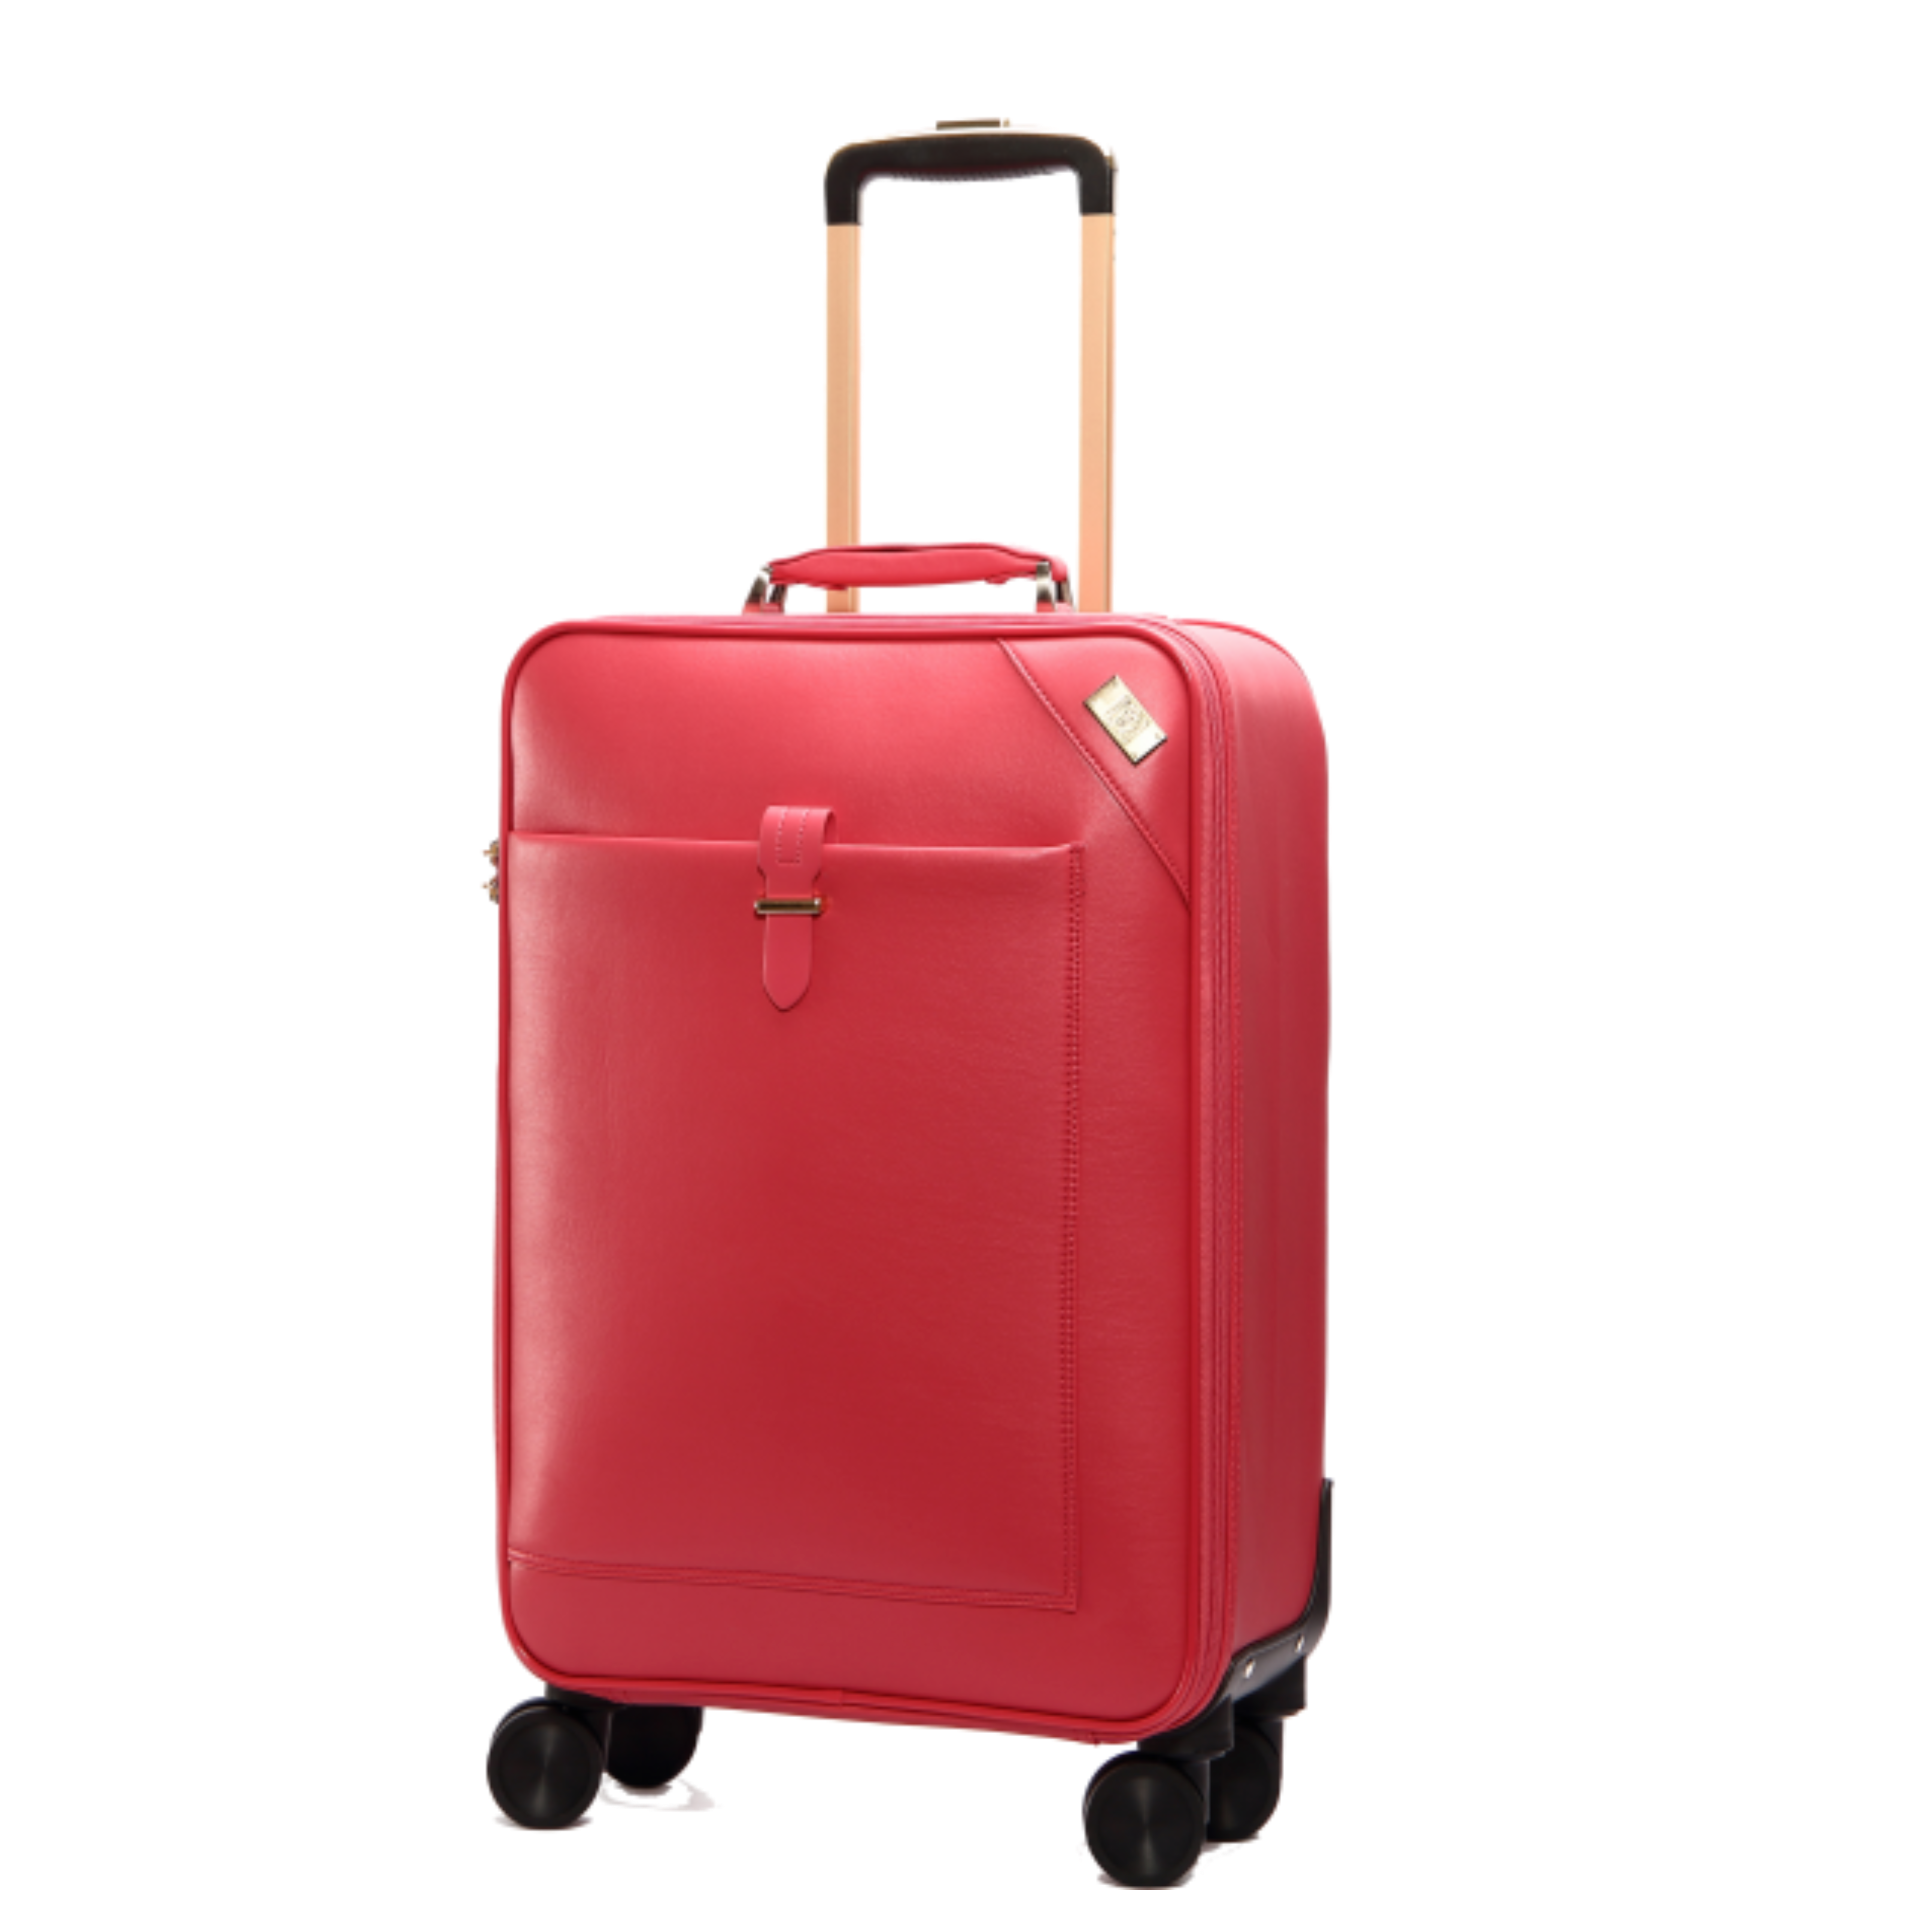 SEMMS PINK LUXURIOUS LEATHER LUGGAGE